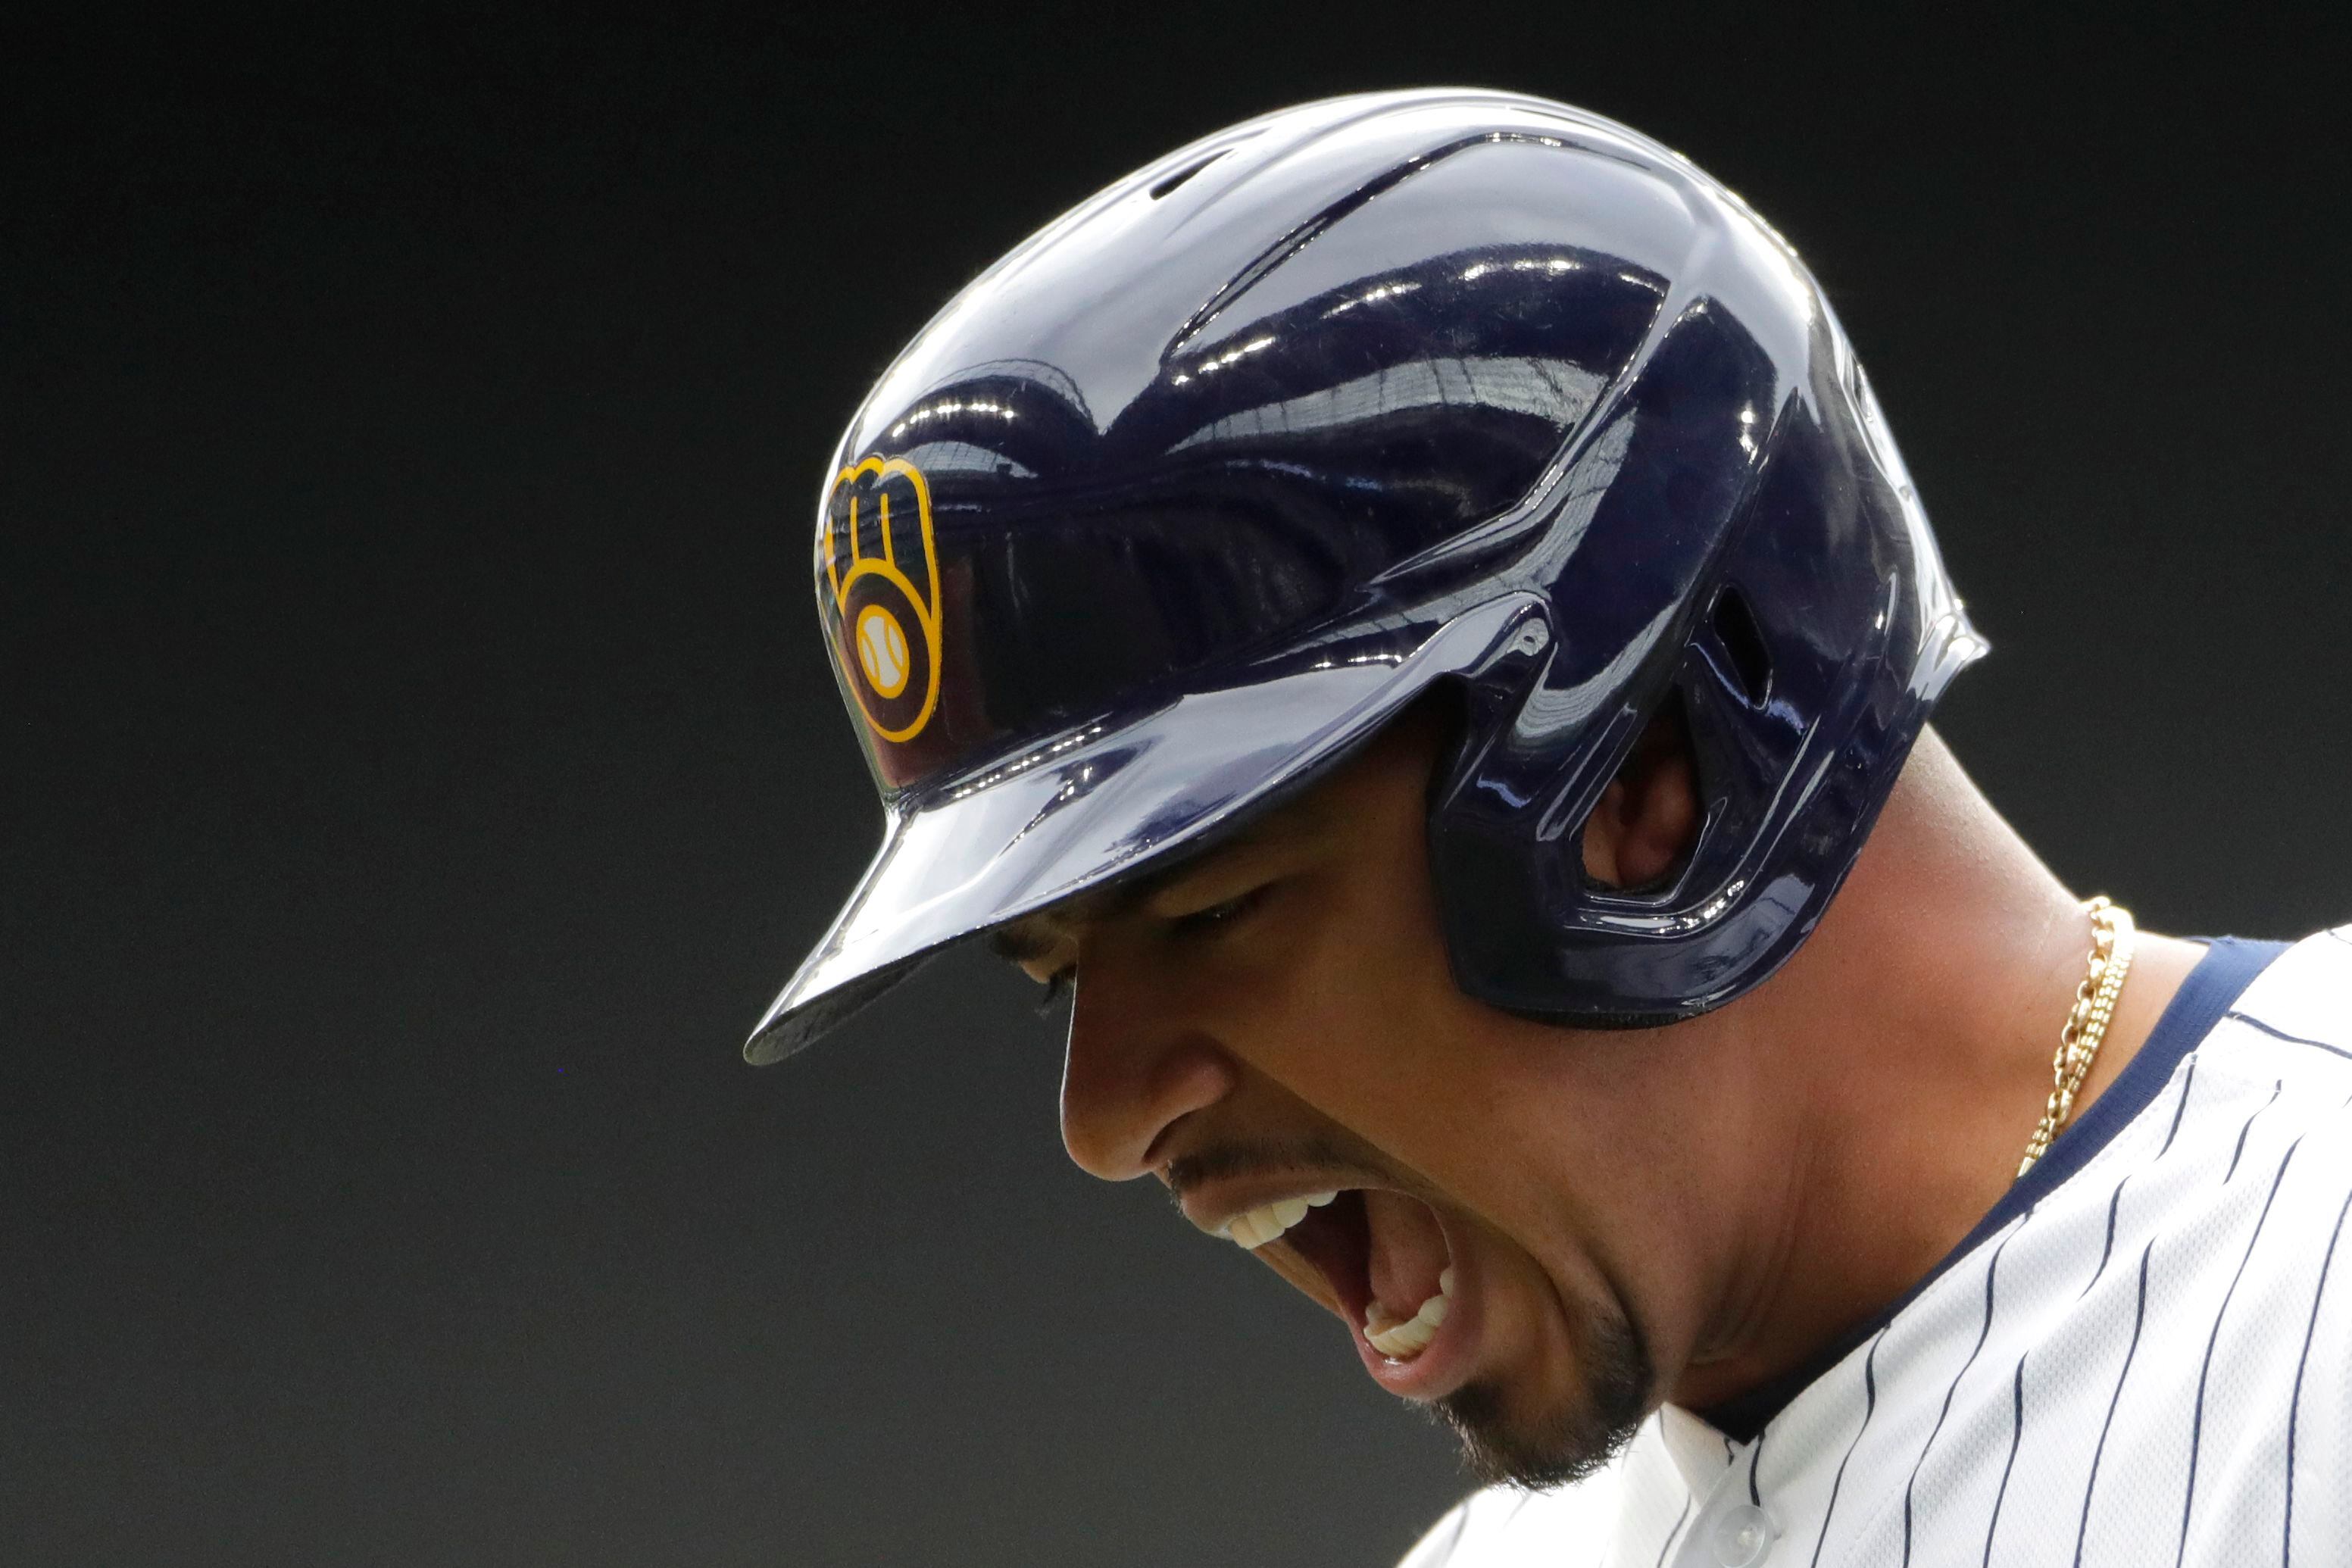 What a day! Milwaukee Brewers clinch division with 8-4 victory